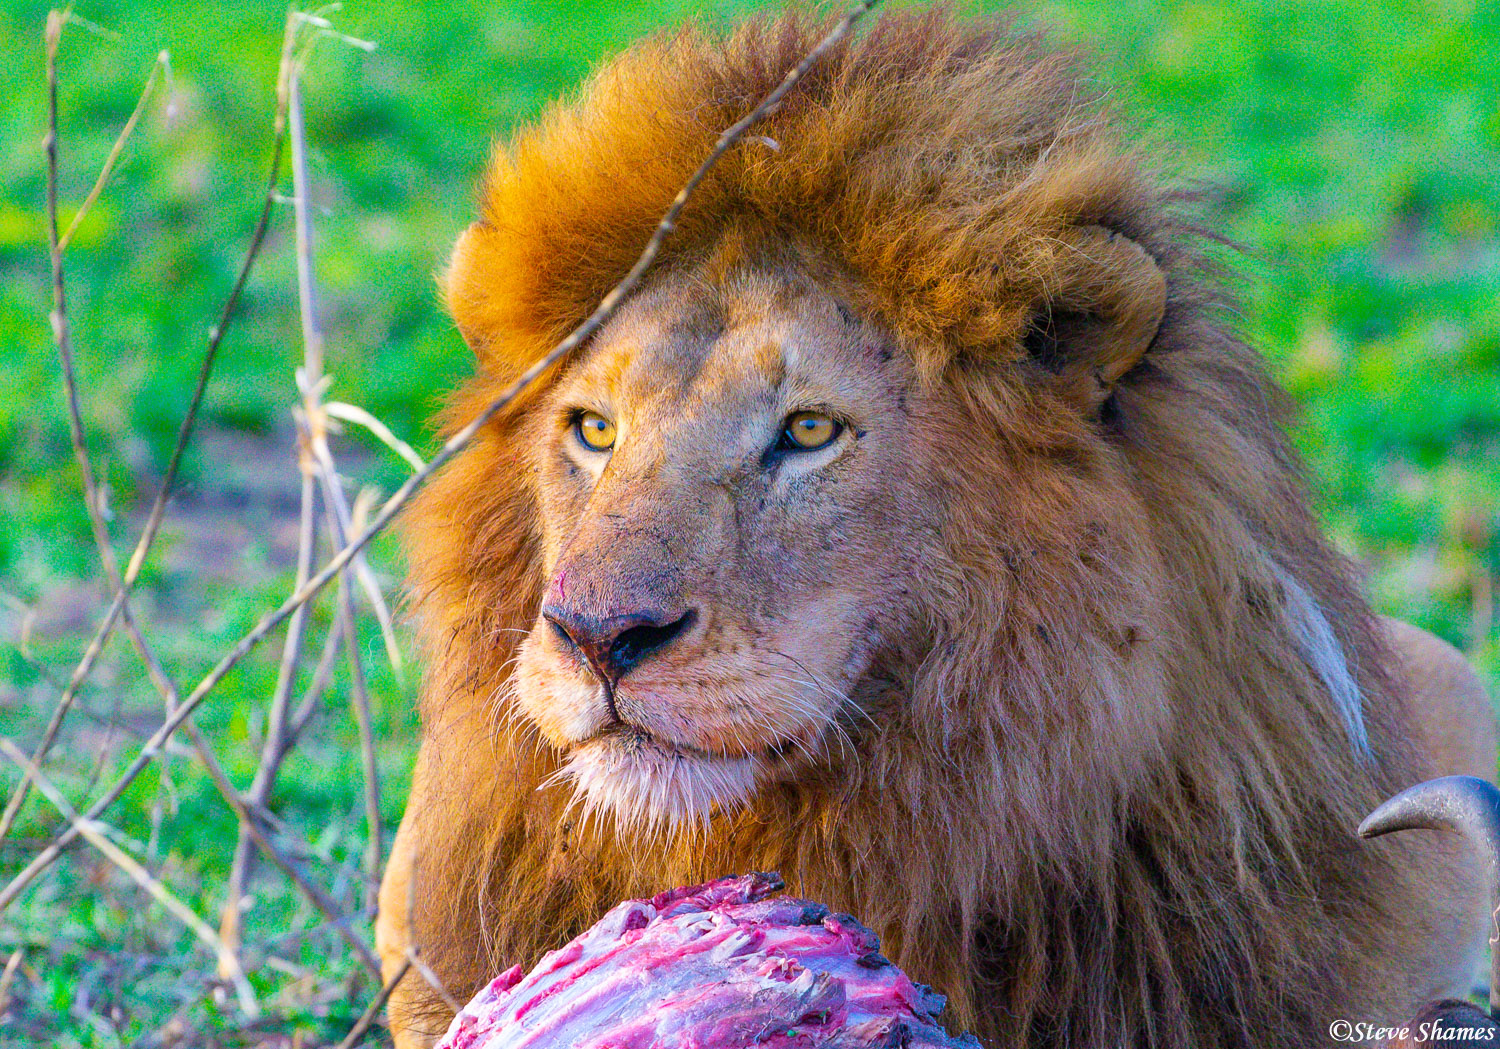 A nice portrait of a lion pausing during his wildebeest meal.